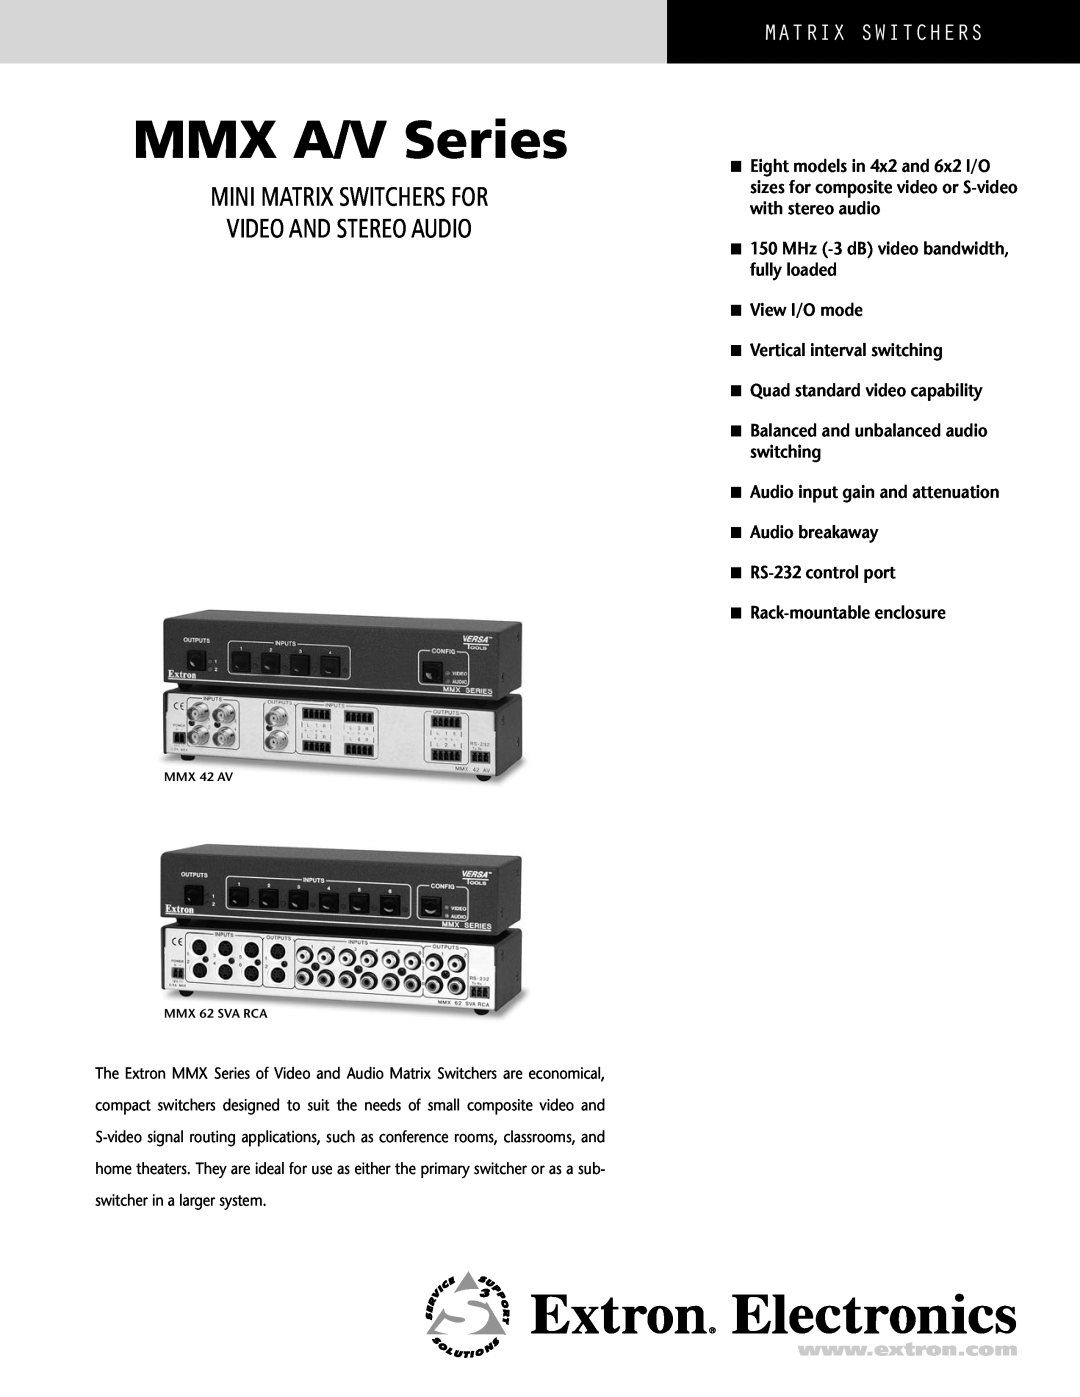 Extron electronic MMX 62 SVA RCA, MMX 42 AV manual Mini Matrix Switchers For Video And Stereo Audio, MMX A/V Series 